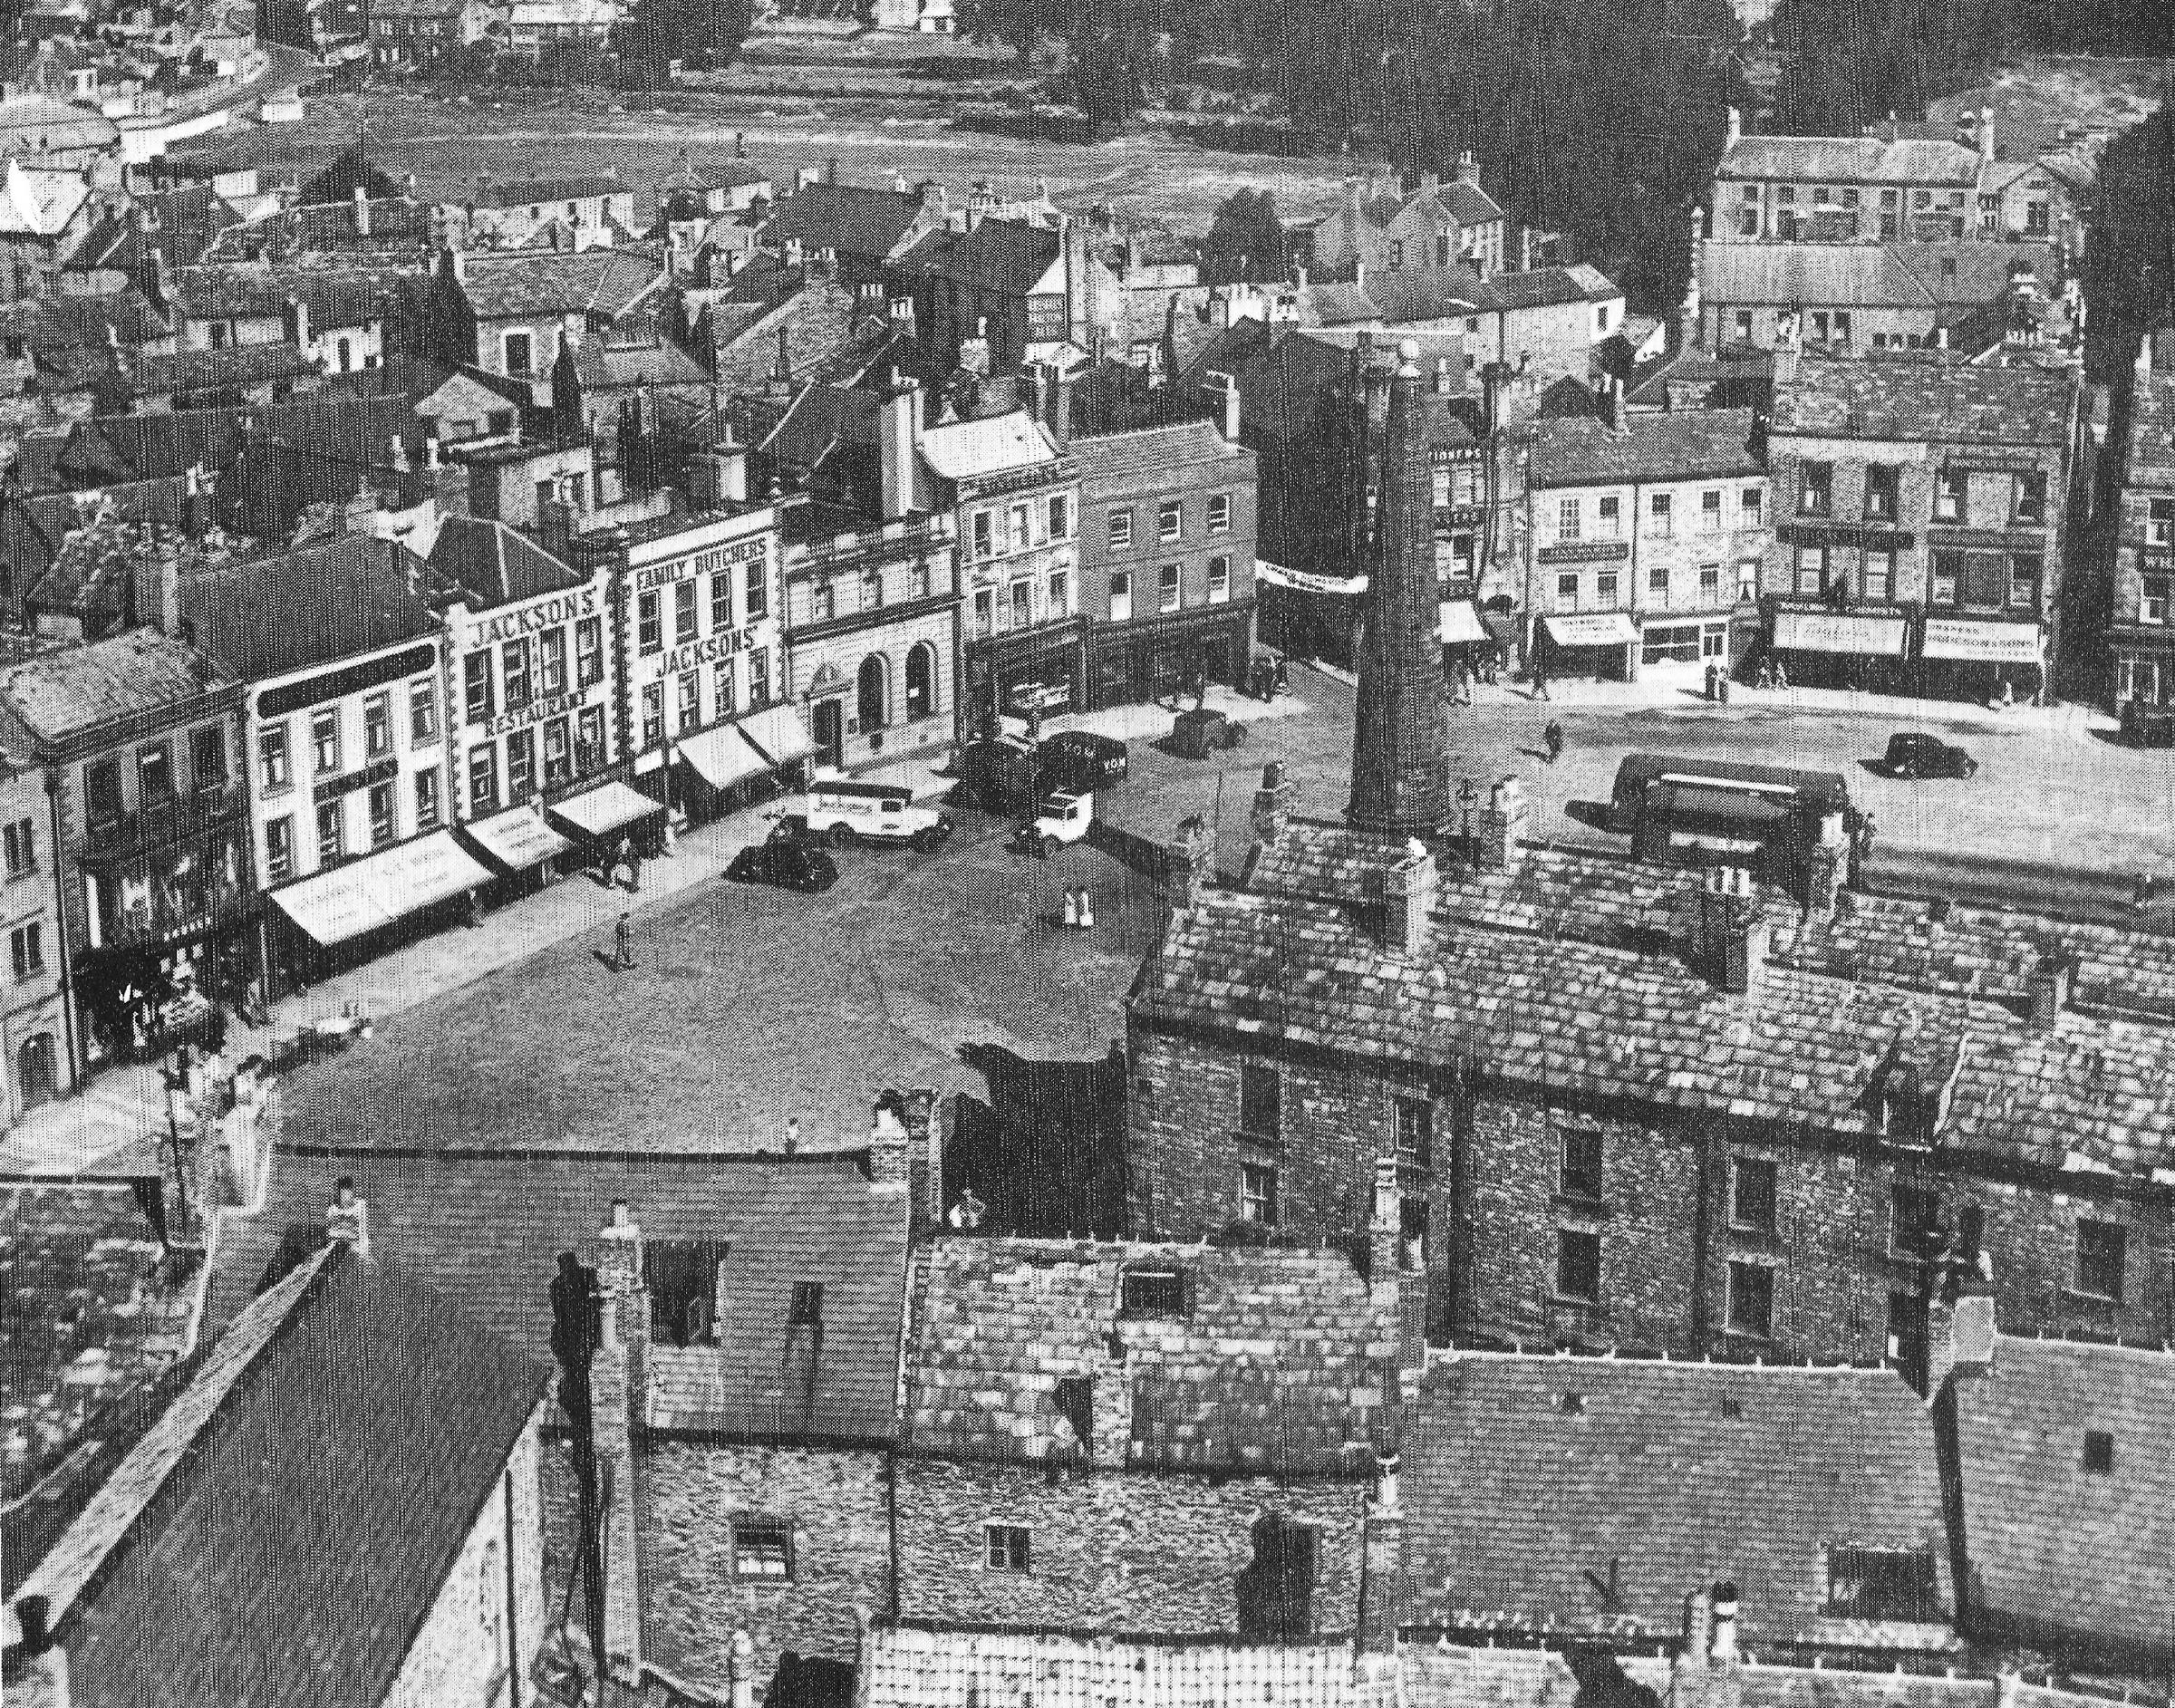 Richmond Market Place from the top of the castle keep in 1945